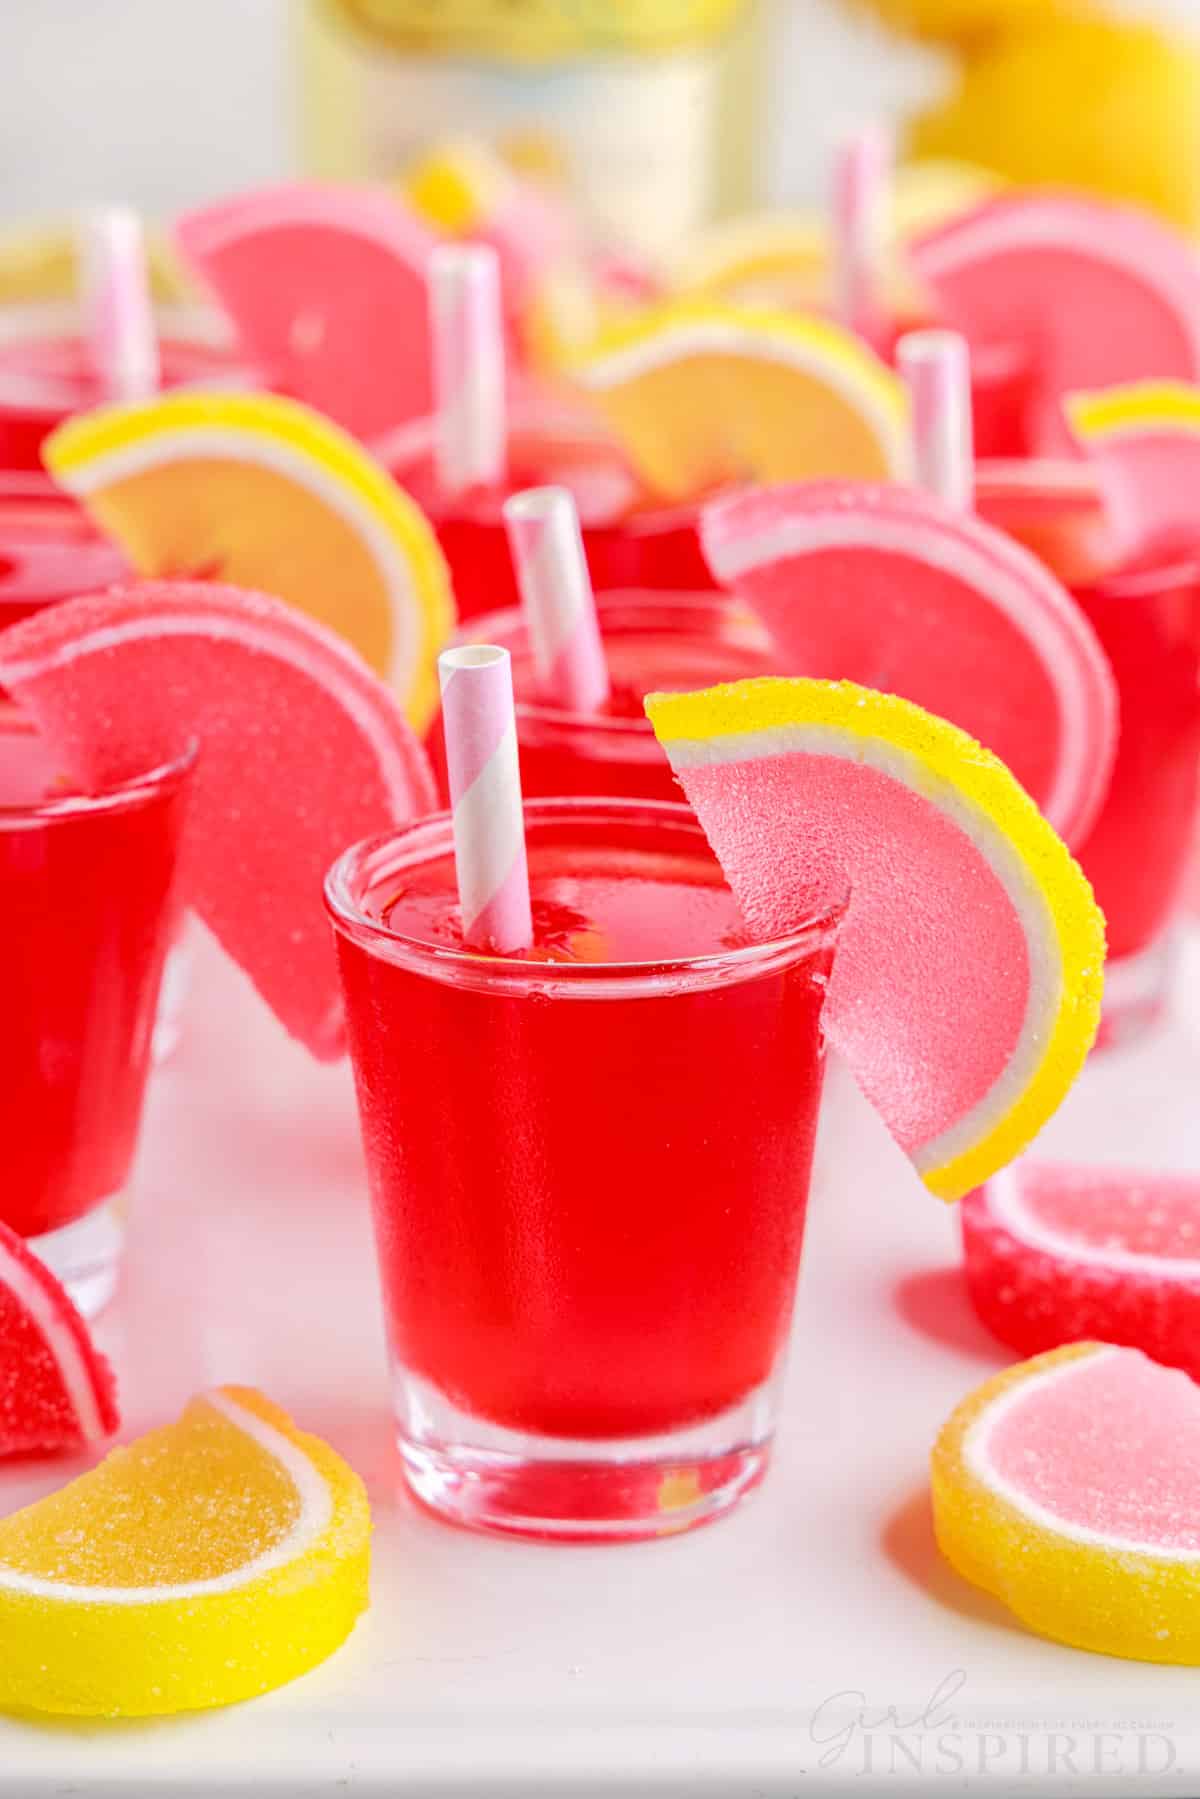 strawberry pink lemonade jello shots with paper straws in them